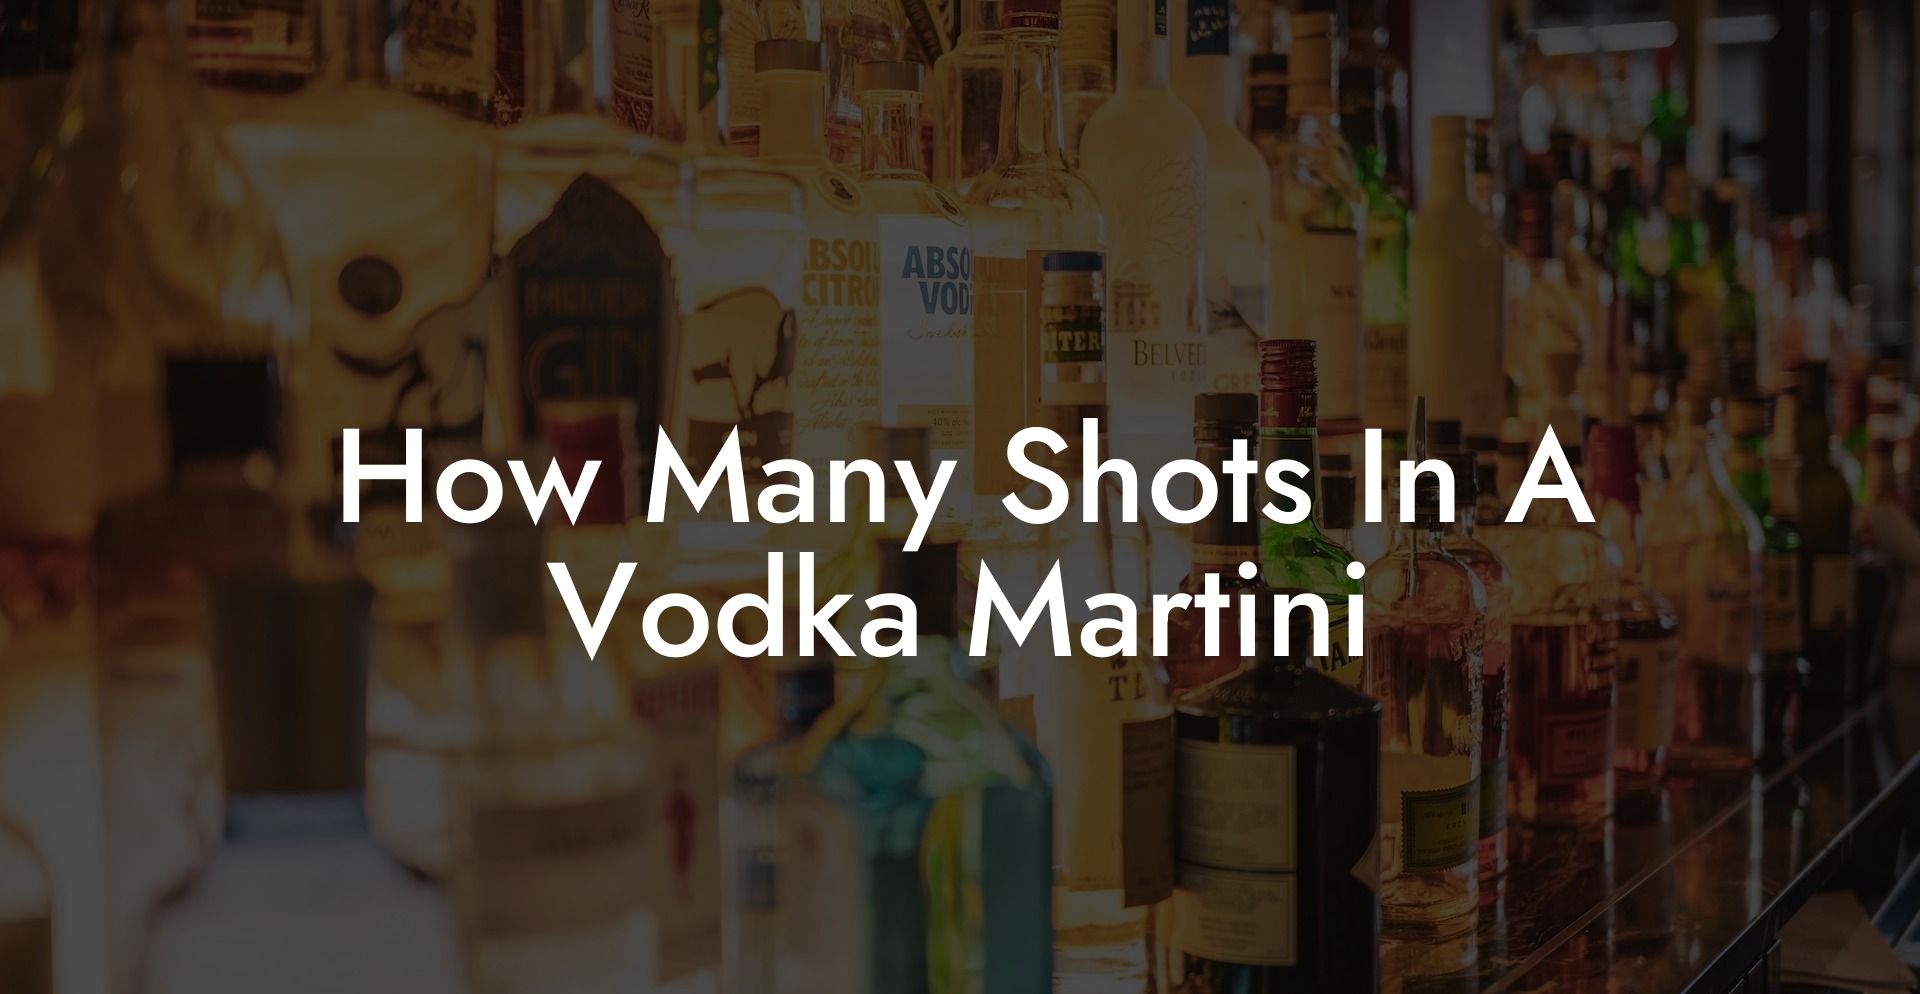 How Many Shots In A Vodka Martini